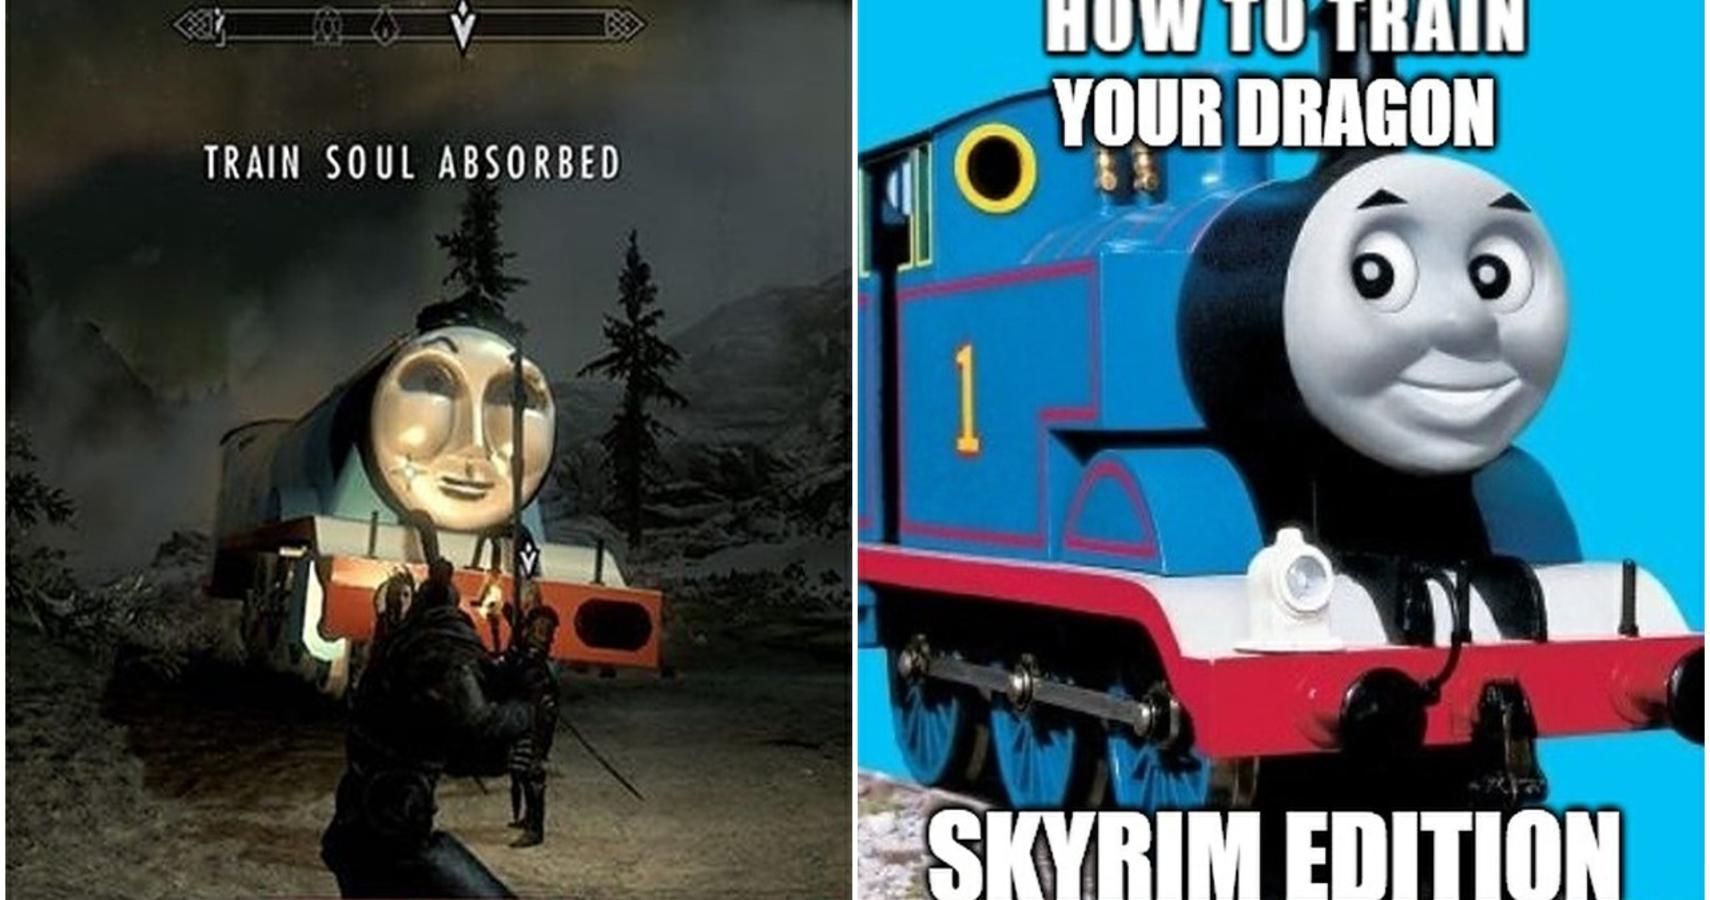 Skyrim: 10 Hilarious Thomas The Train Memes That Are Too Funny